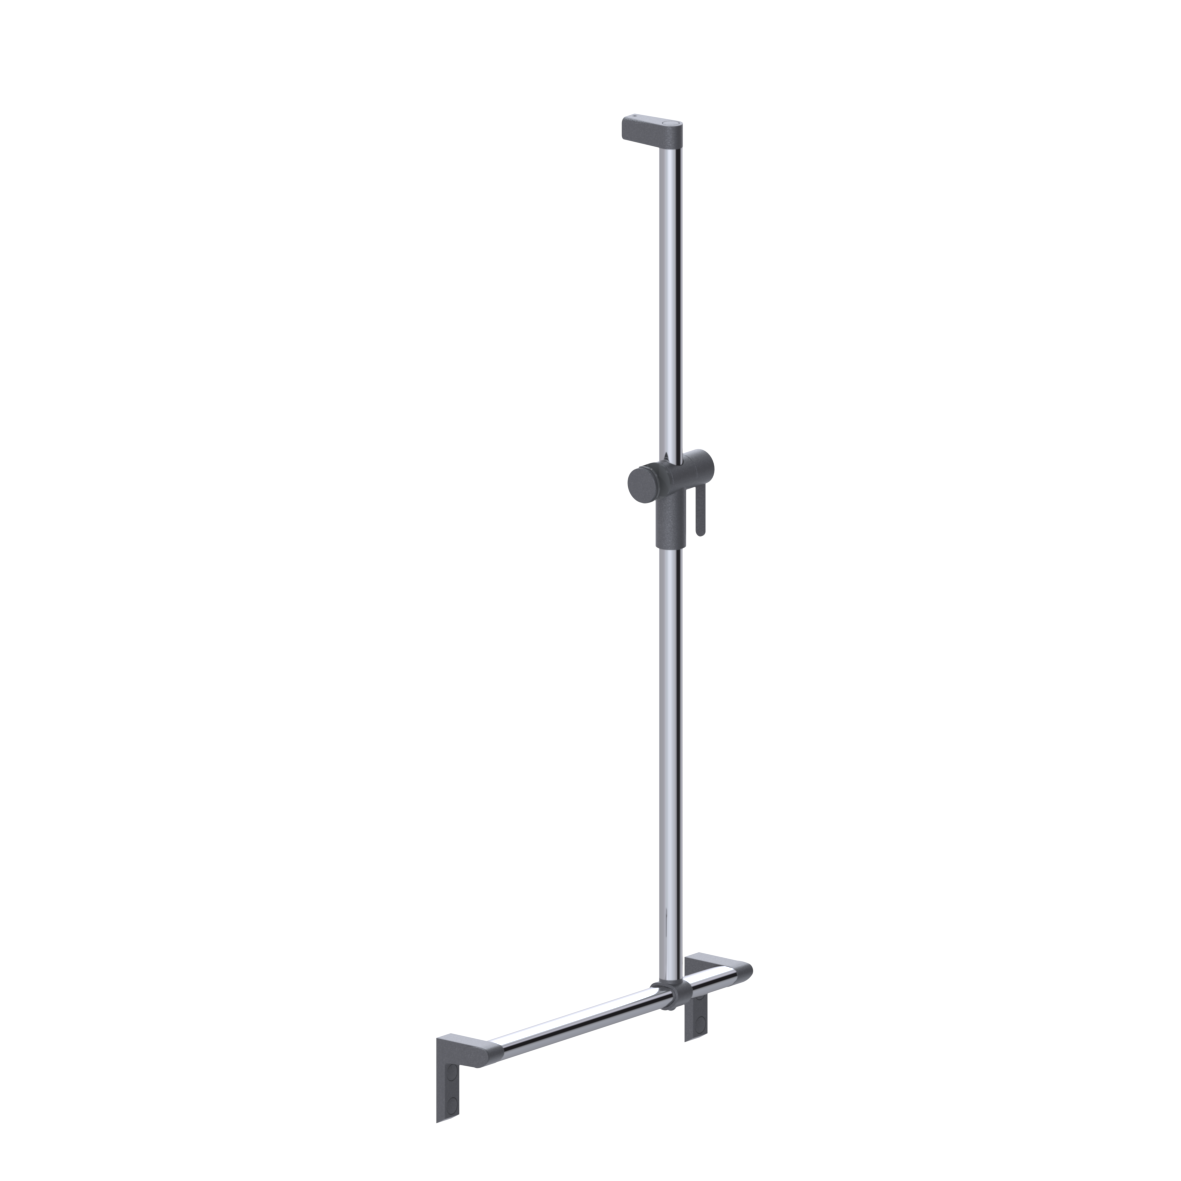 Cavere Care Chrome Shower handrail, with movable shower handrail, 500 x 1100 mm, Chrome metallic anthracite